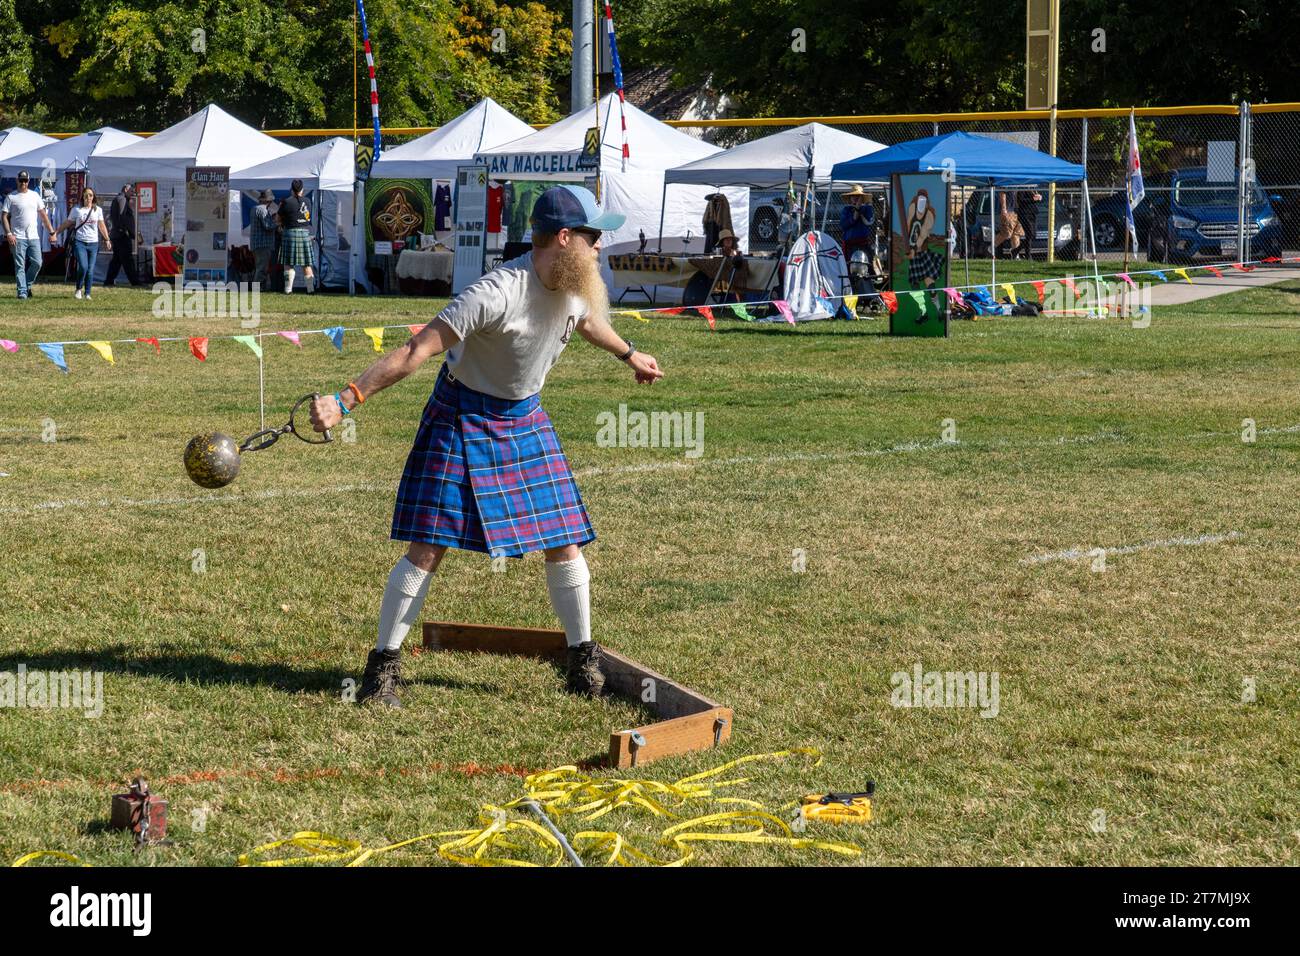 A competitor in a kilt throws the ball in the Highland games weight throw at the Moab Celtic Festival, Scots on the Rocks, in Moab, Utah.  The steel b Stock Photo